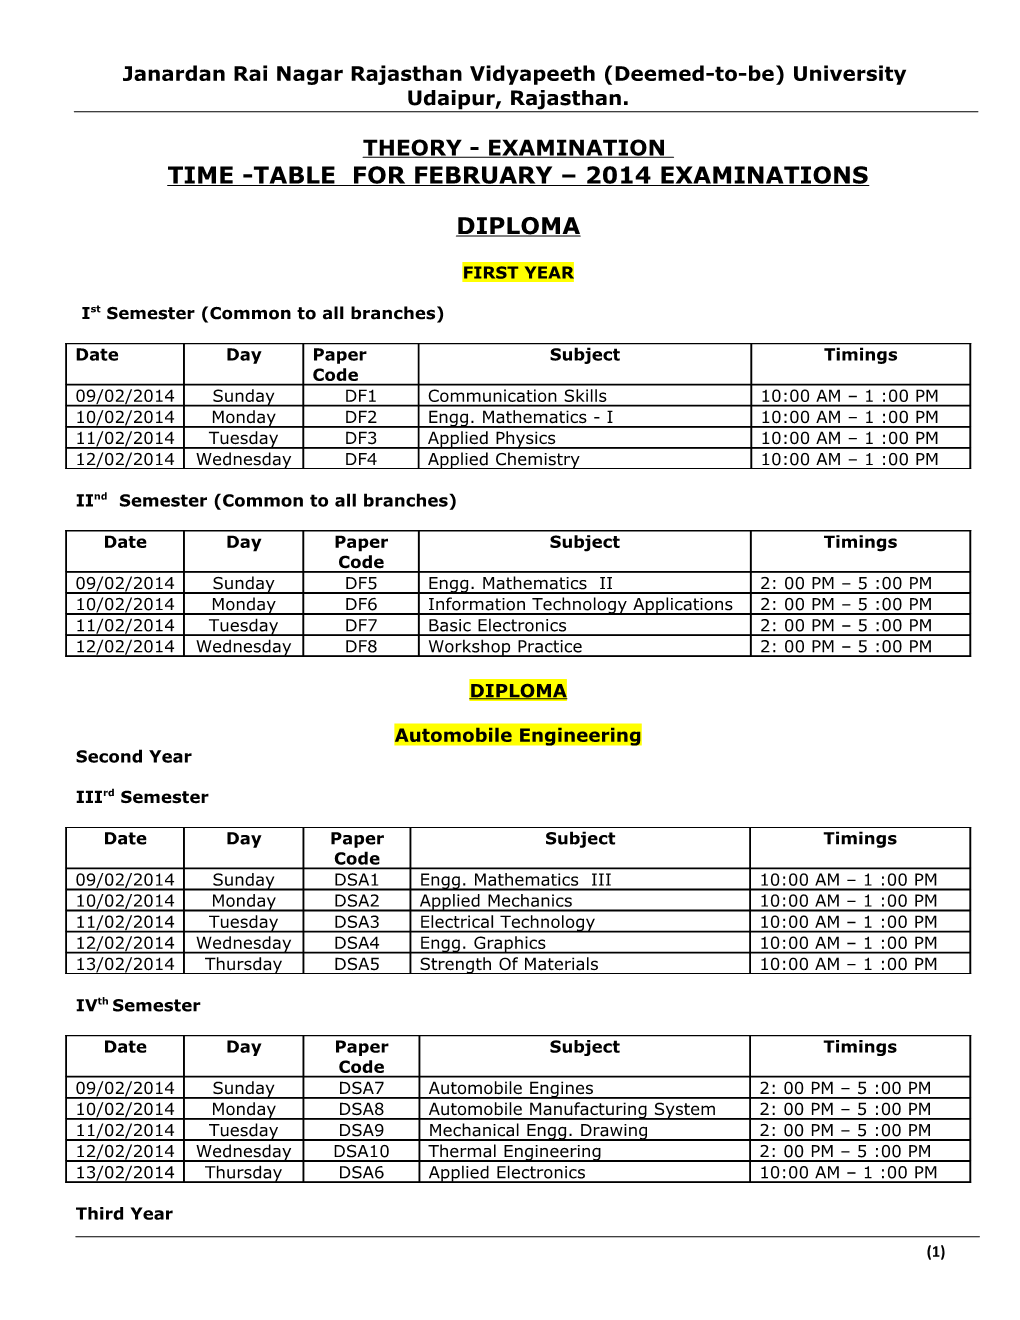 Exam Time-Table for December 2003